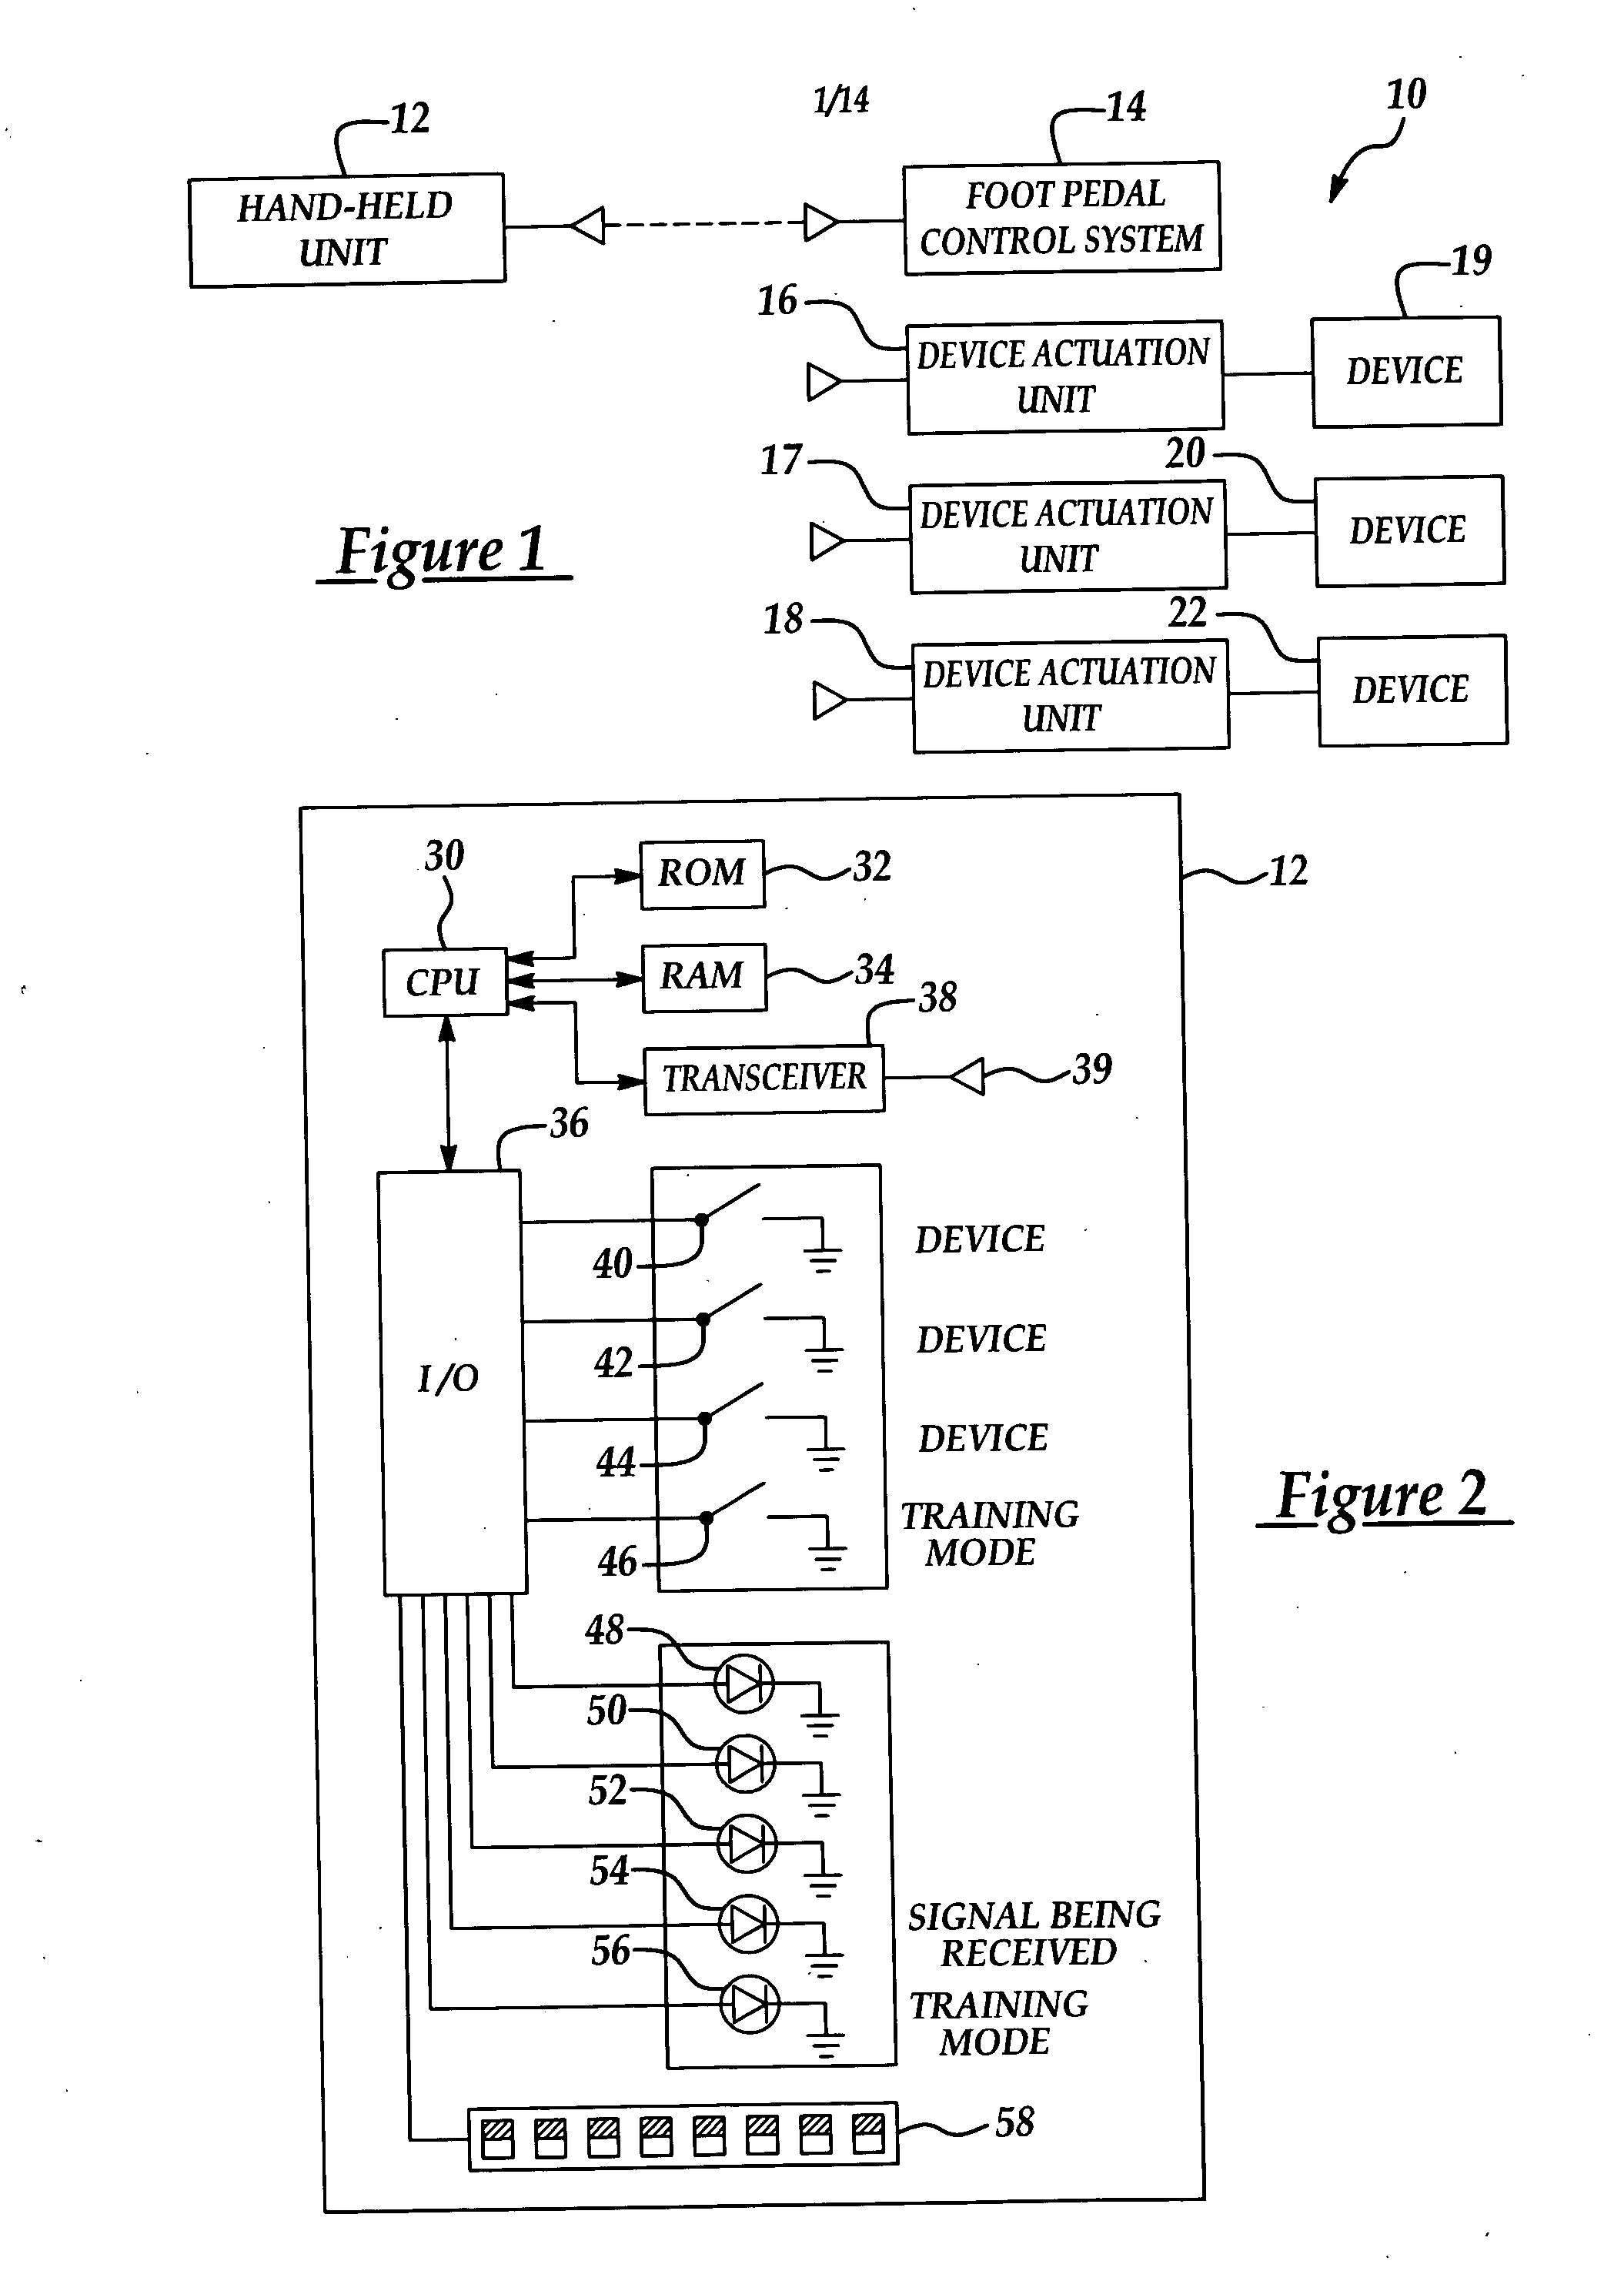 System and method for remotely controlling devices